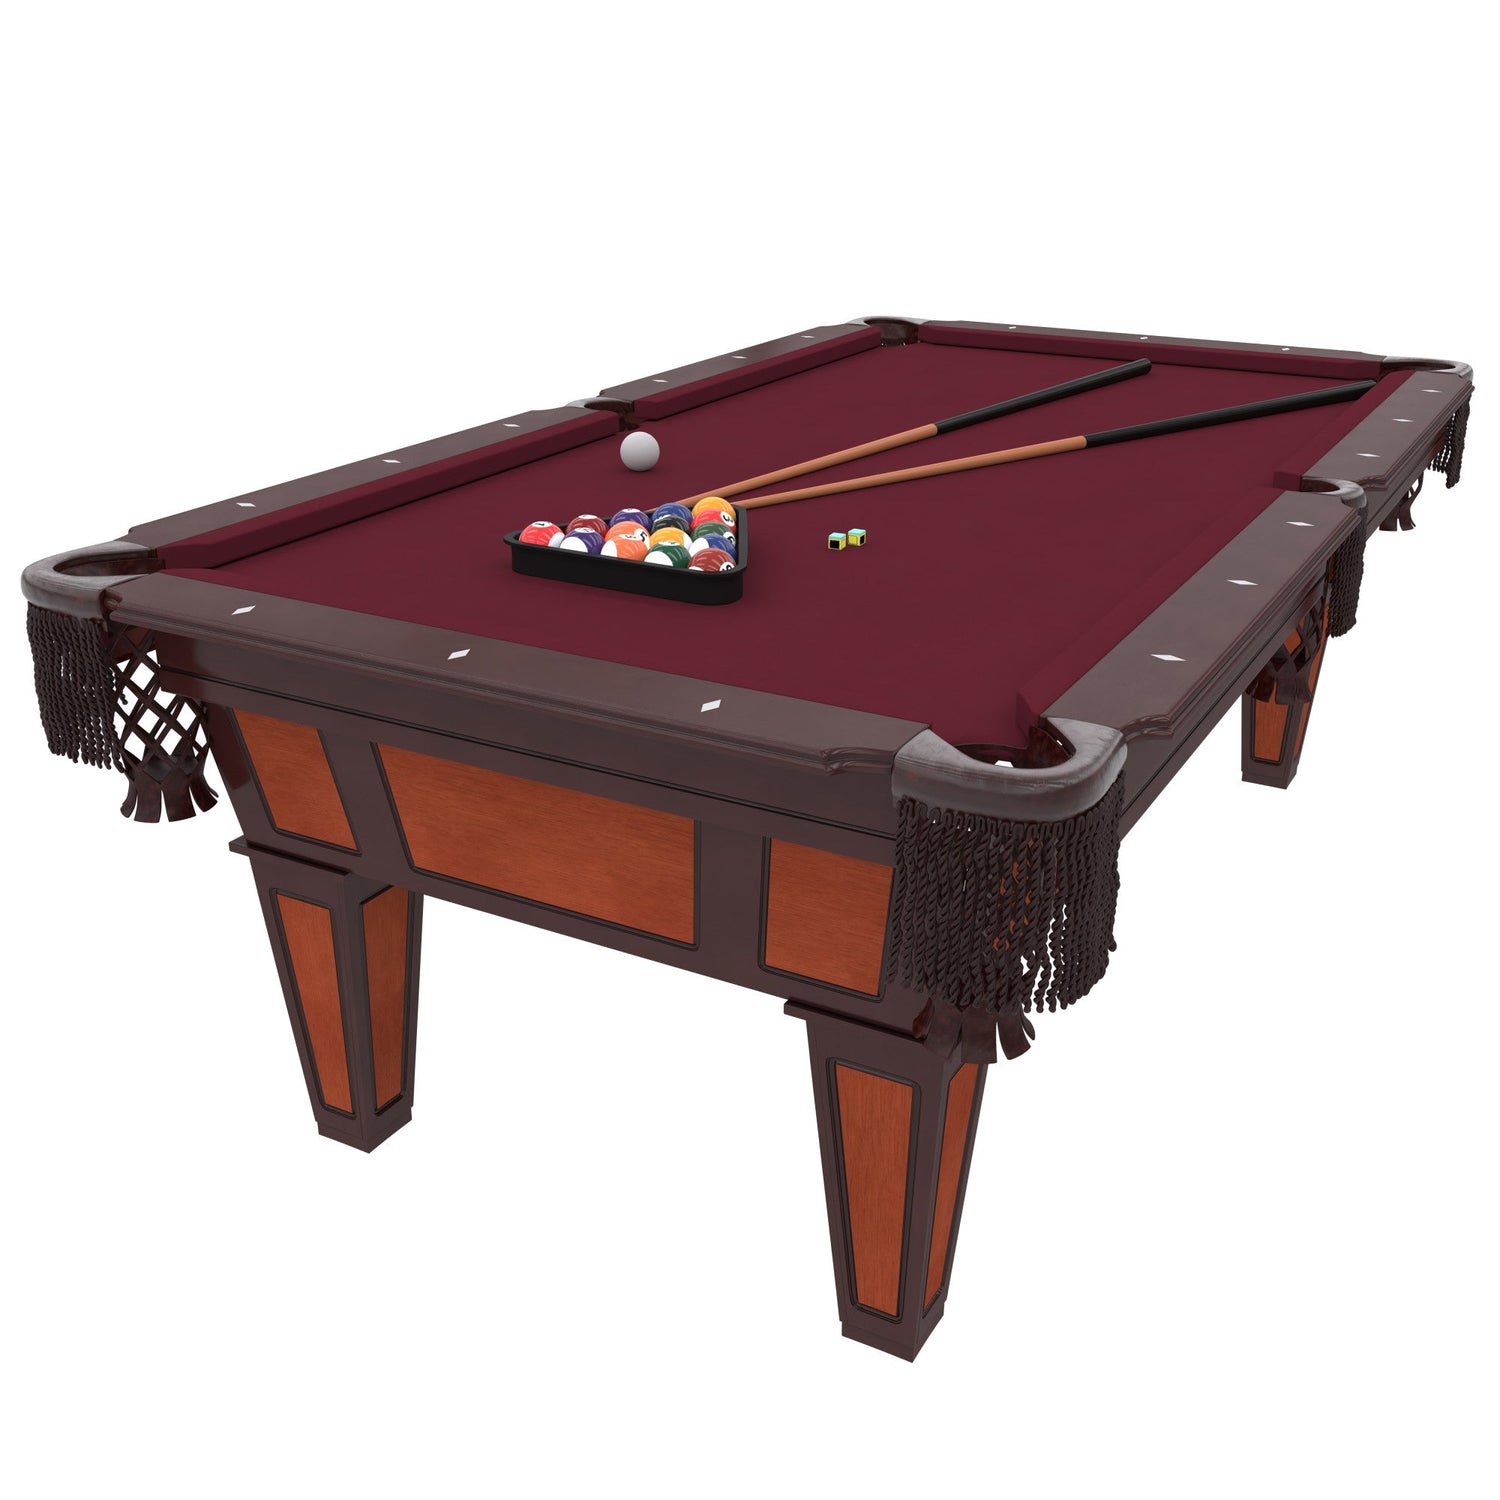 7FT POOL TABLES